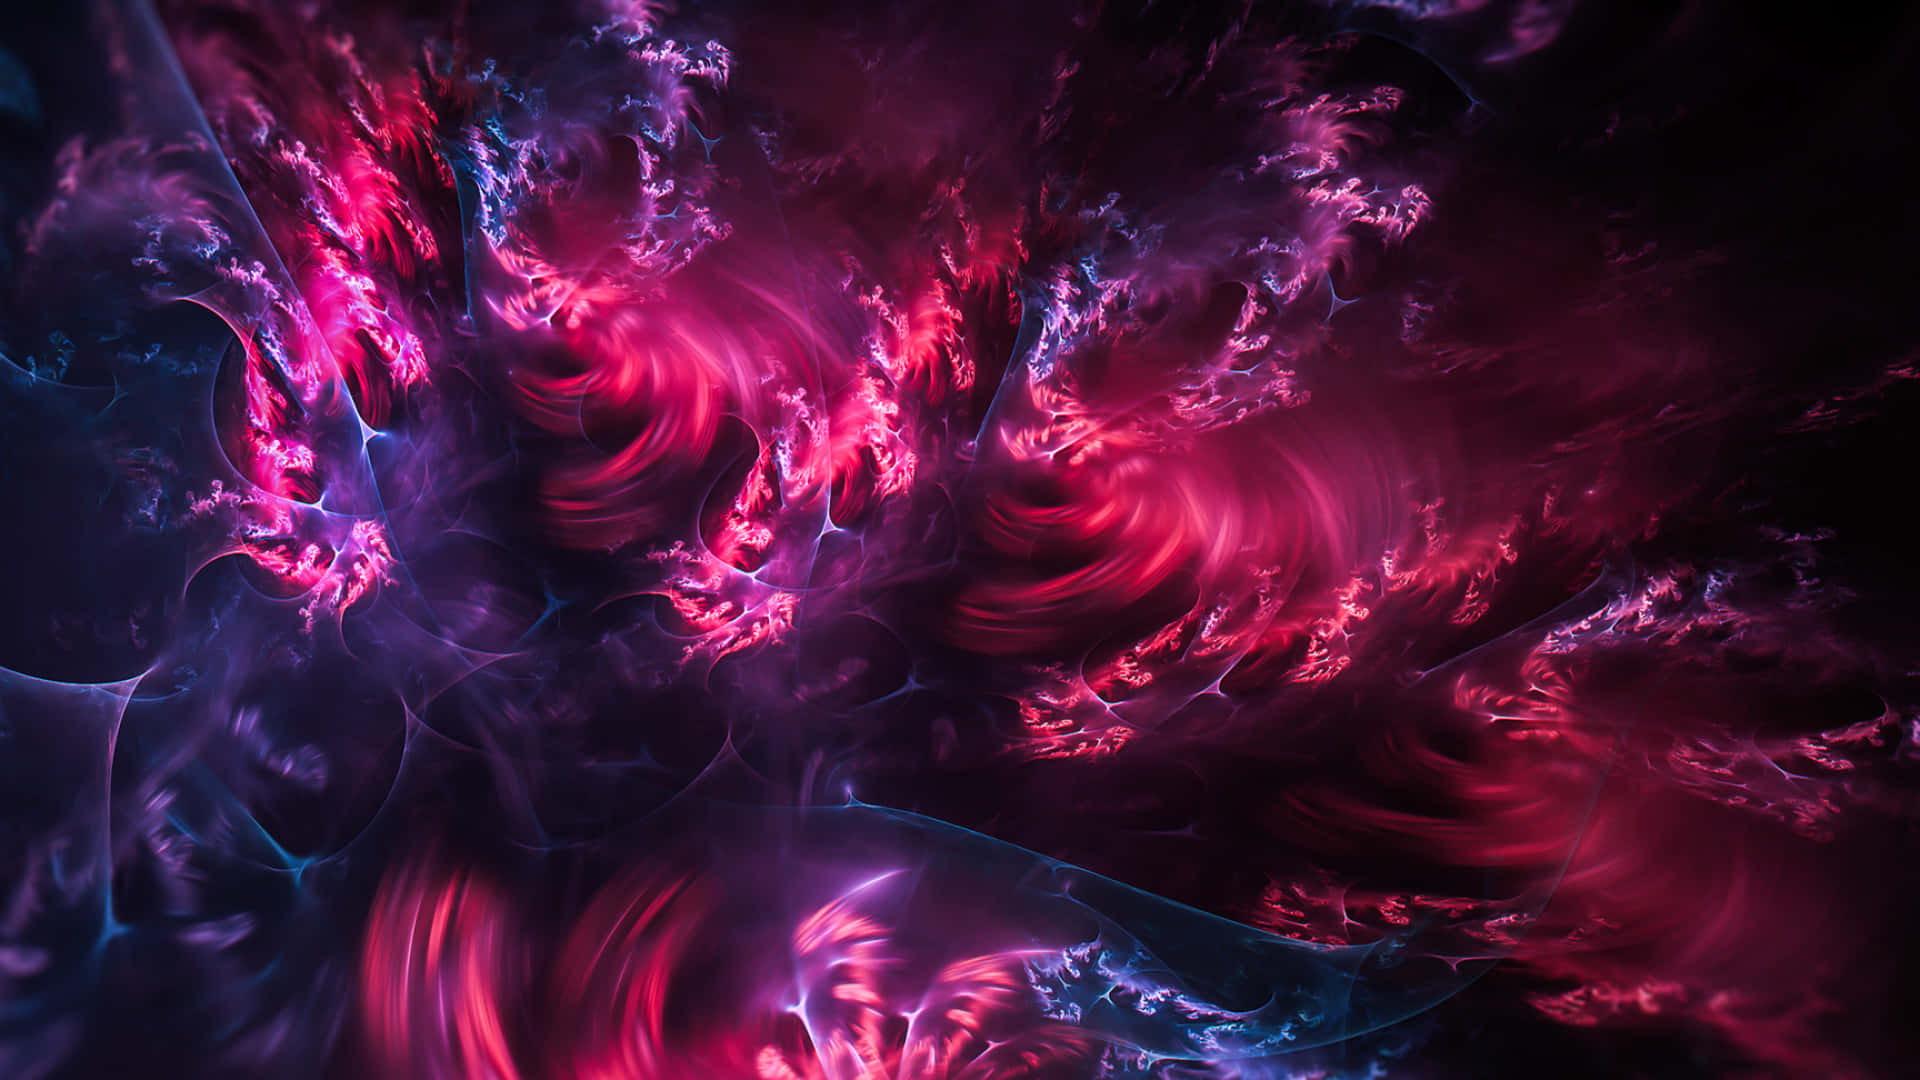 Check Out this Mesmerizing Blue and Purple Desktop Wallpaper